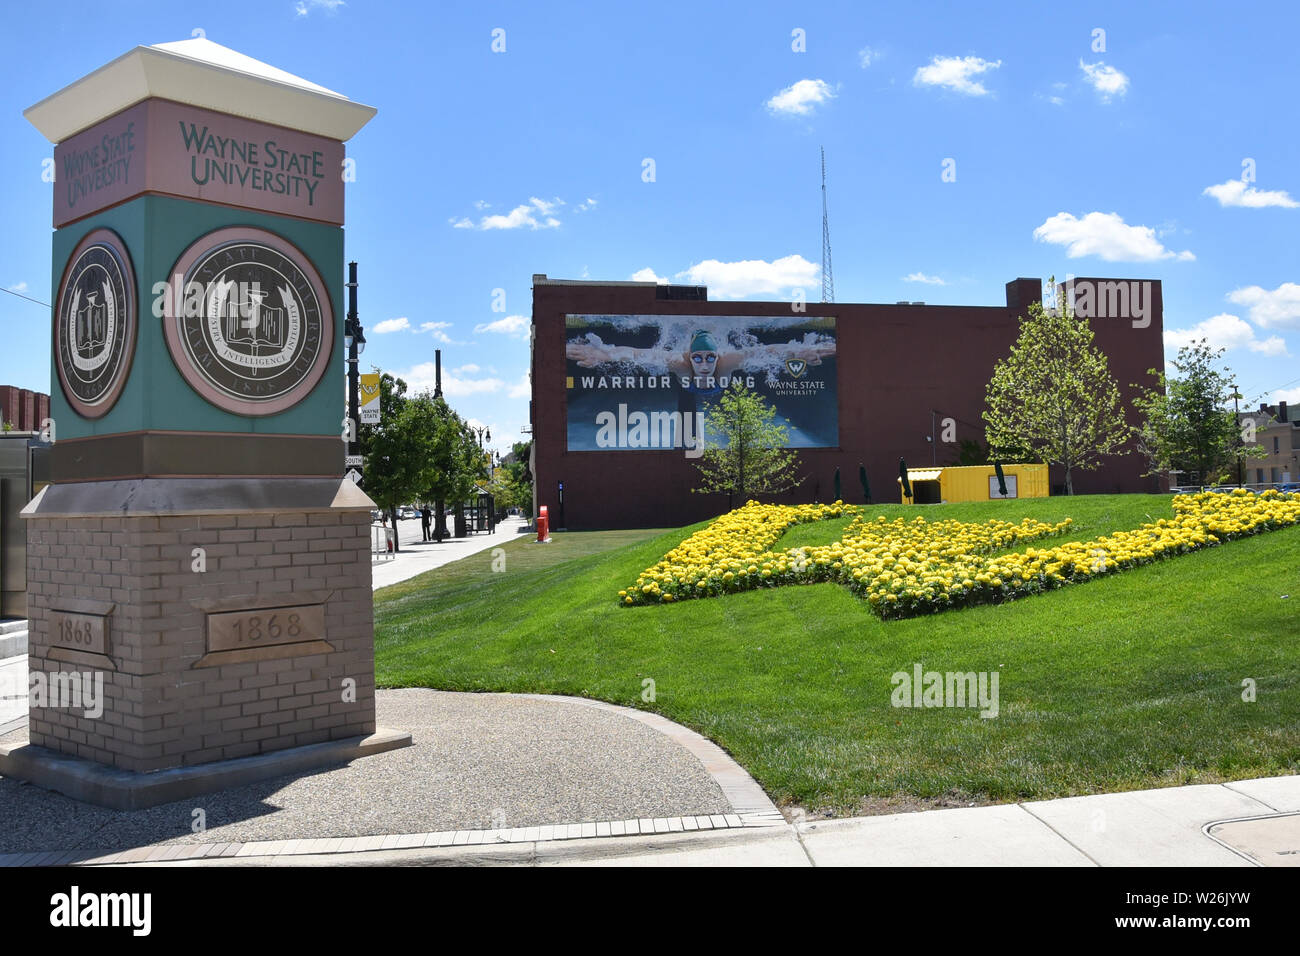 DETROIT, MI / USA - JUNE 30, 2019:  A sign on a building near Wayne State University displays the Warrior Strong logo Stock Photo